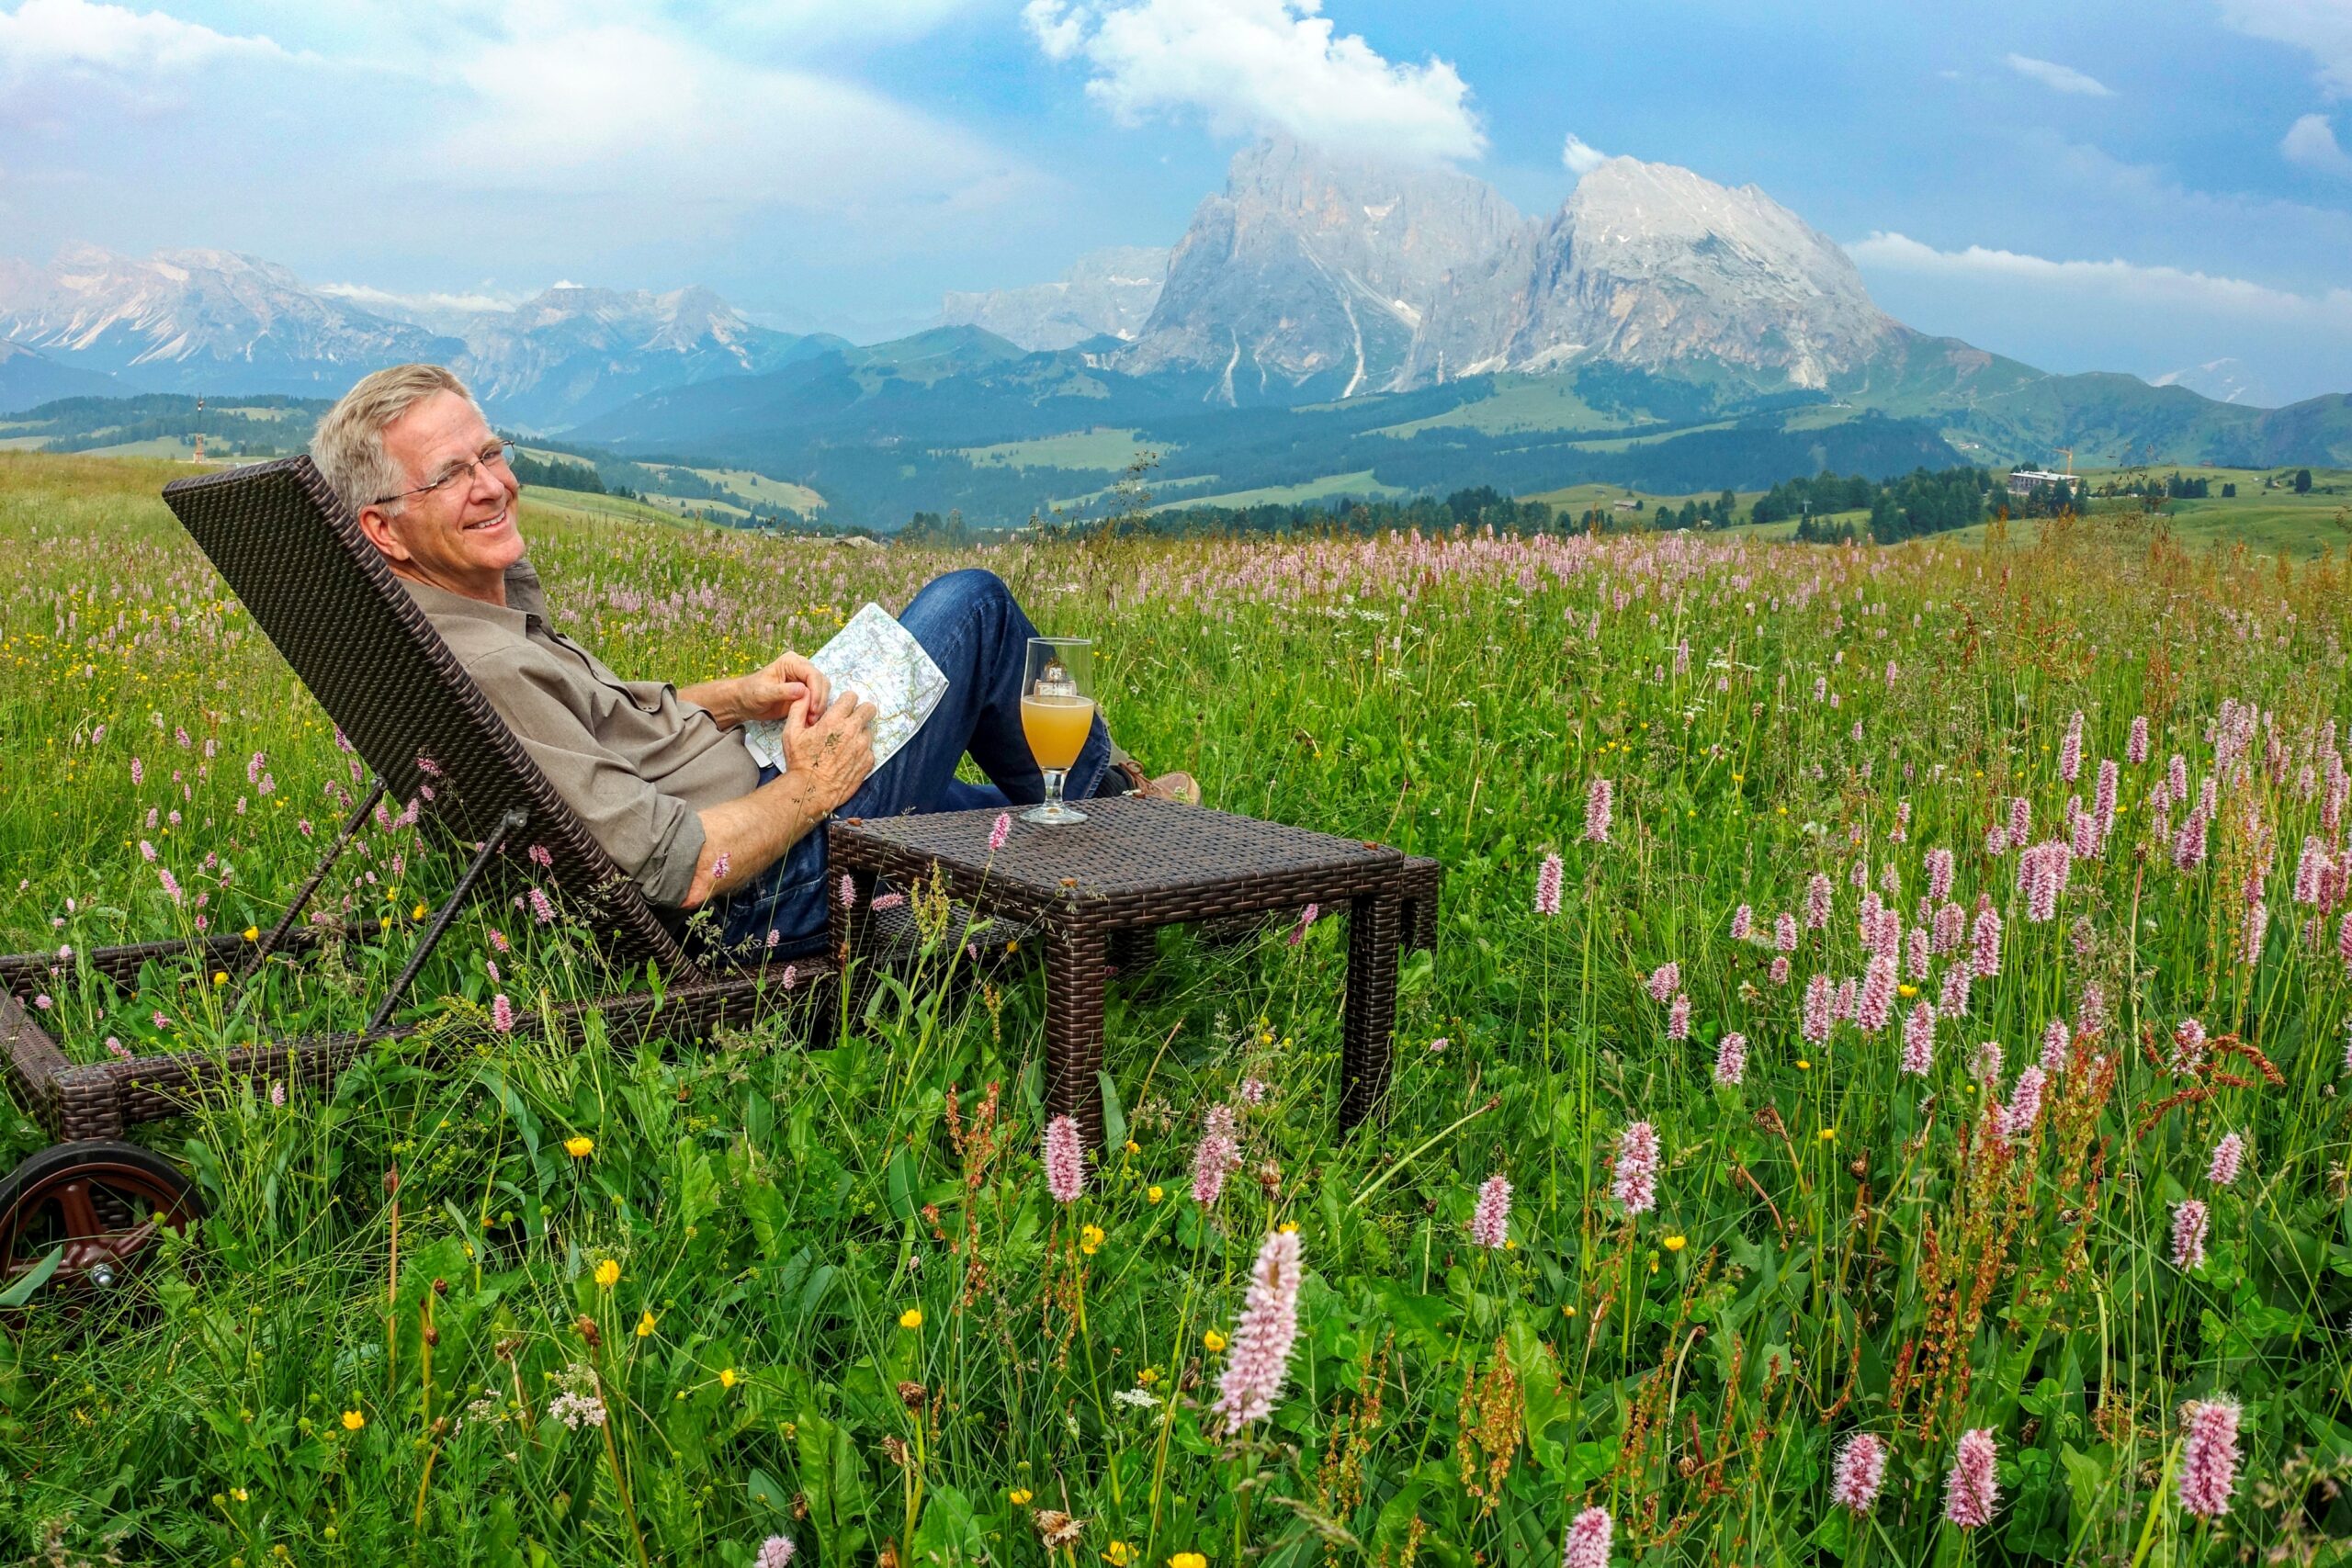 Rick Steves sits in a lounge chair with a map in hand in the middle of a lush green field with mountains in the distance.